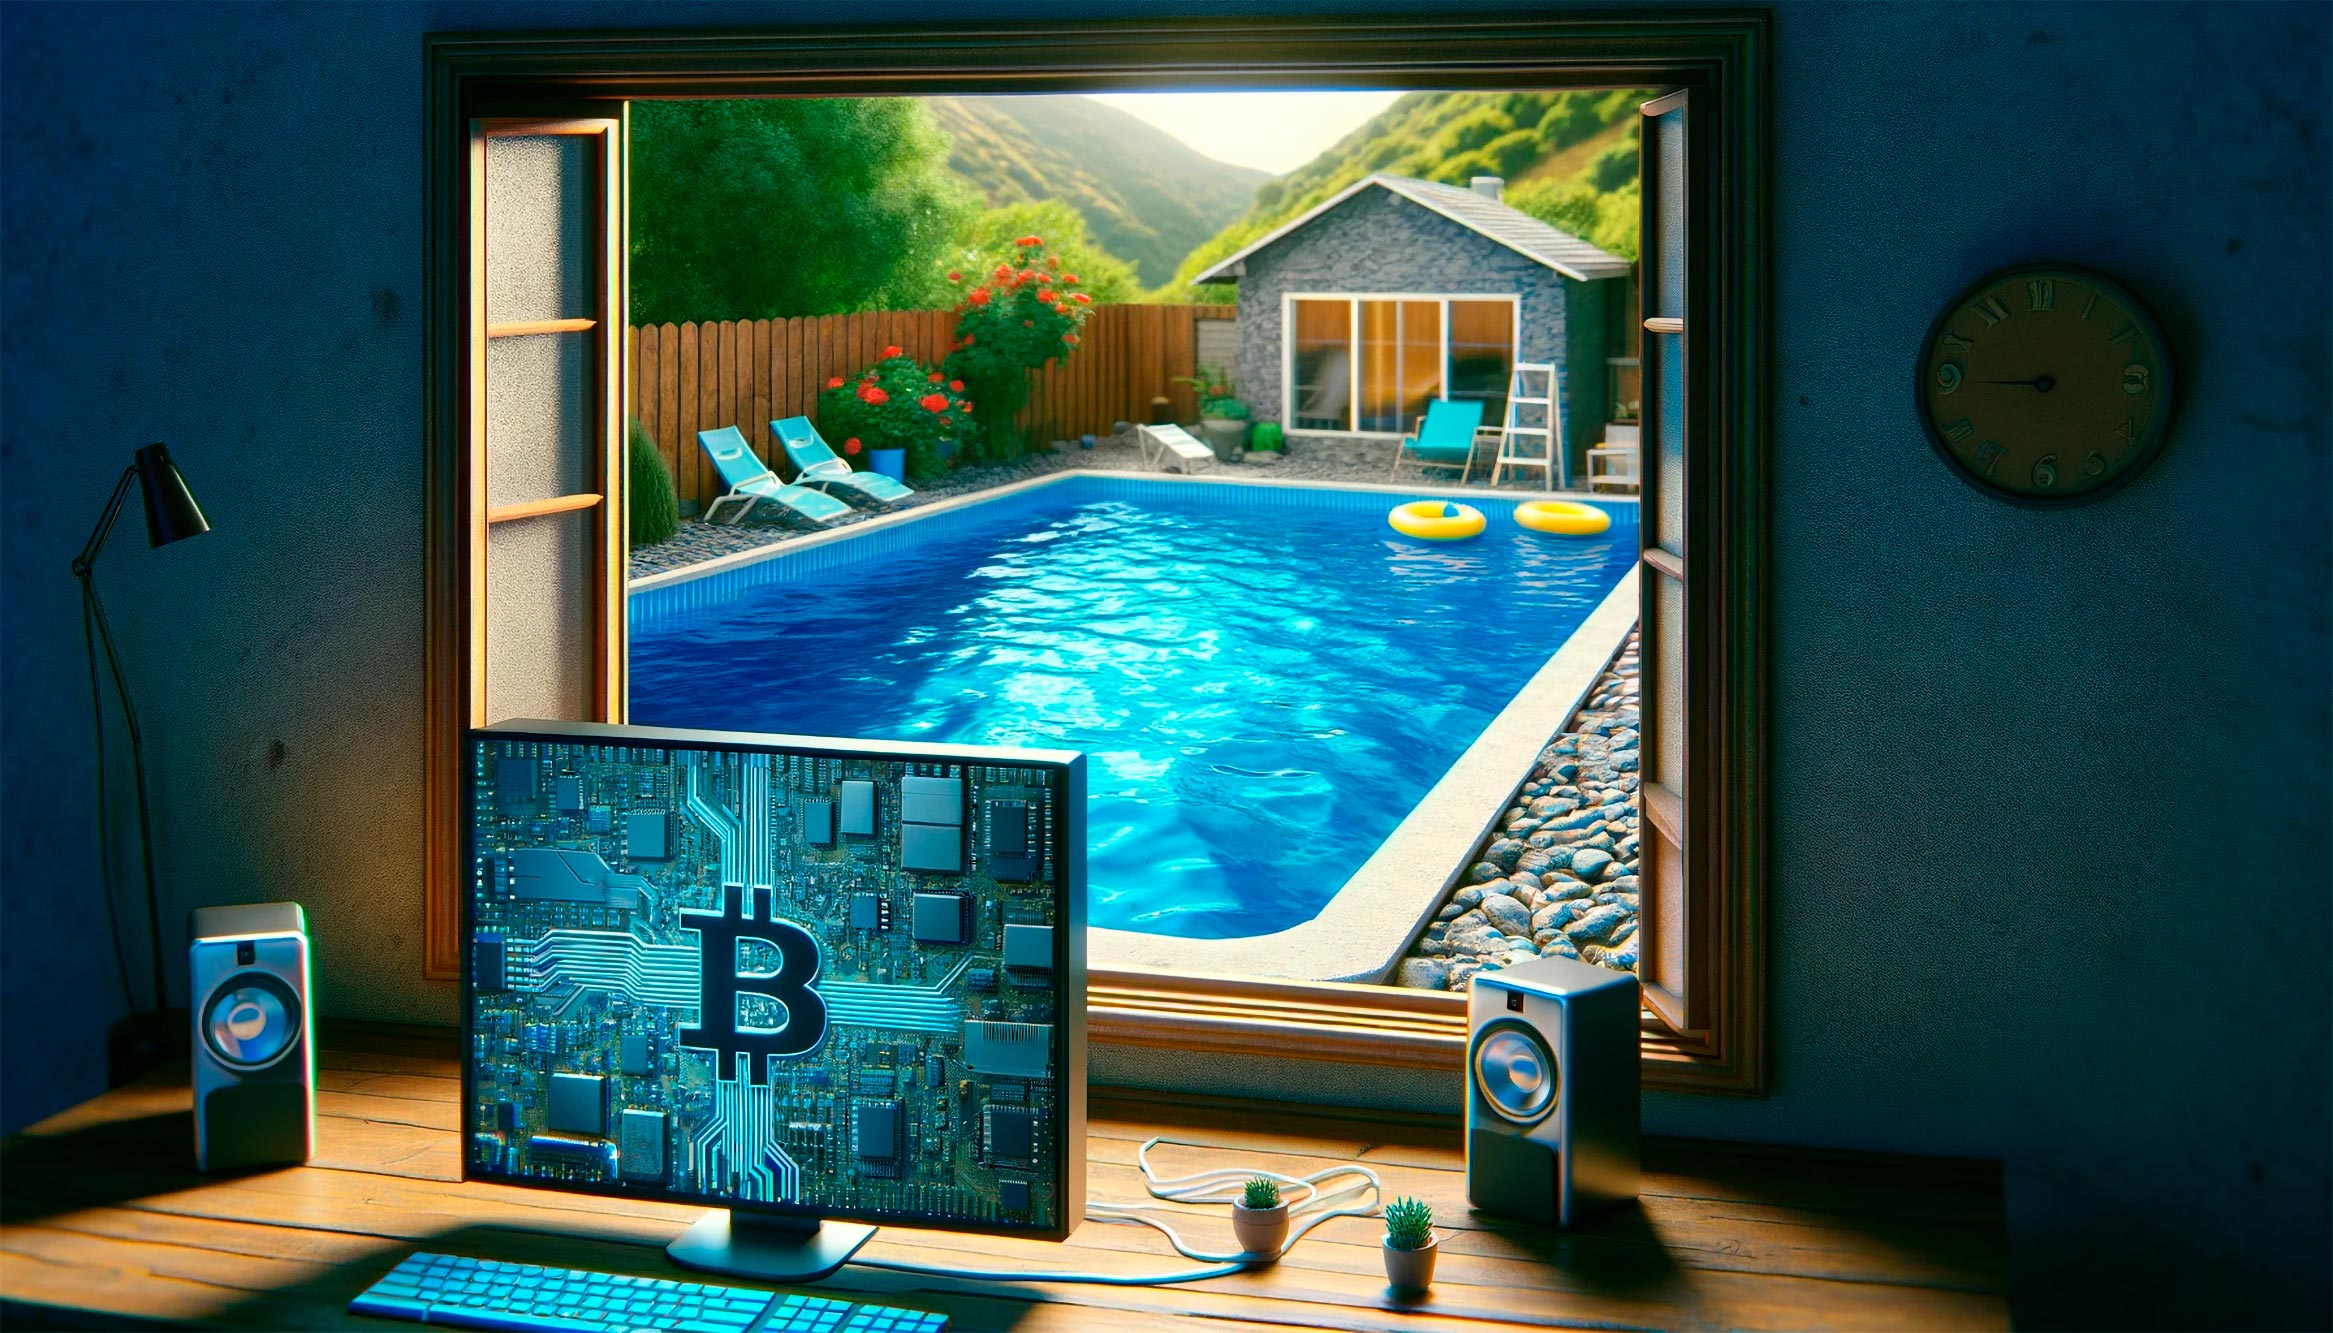 Cryptocurrency’s Thirst: A Single Bitcoin Transaction Consumes a Pool’s Worth of Water